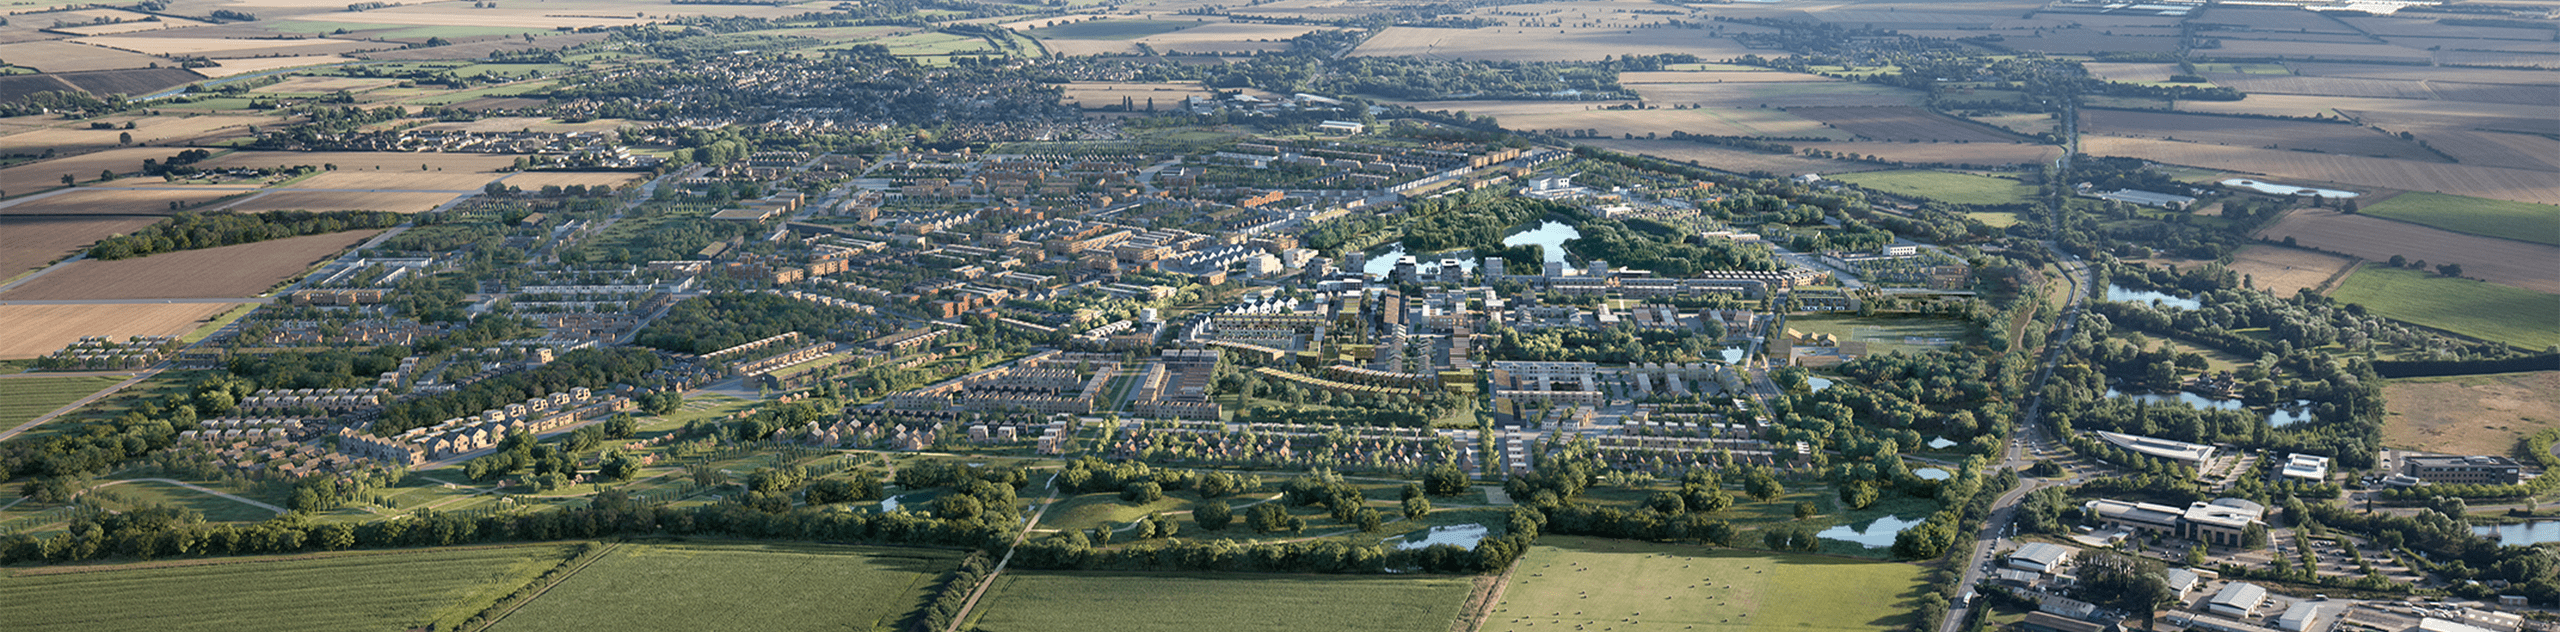 A CGI visual of the proposed Waterbeach development from above. © Assembly CGI